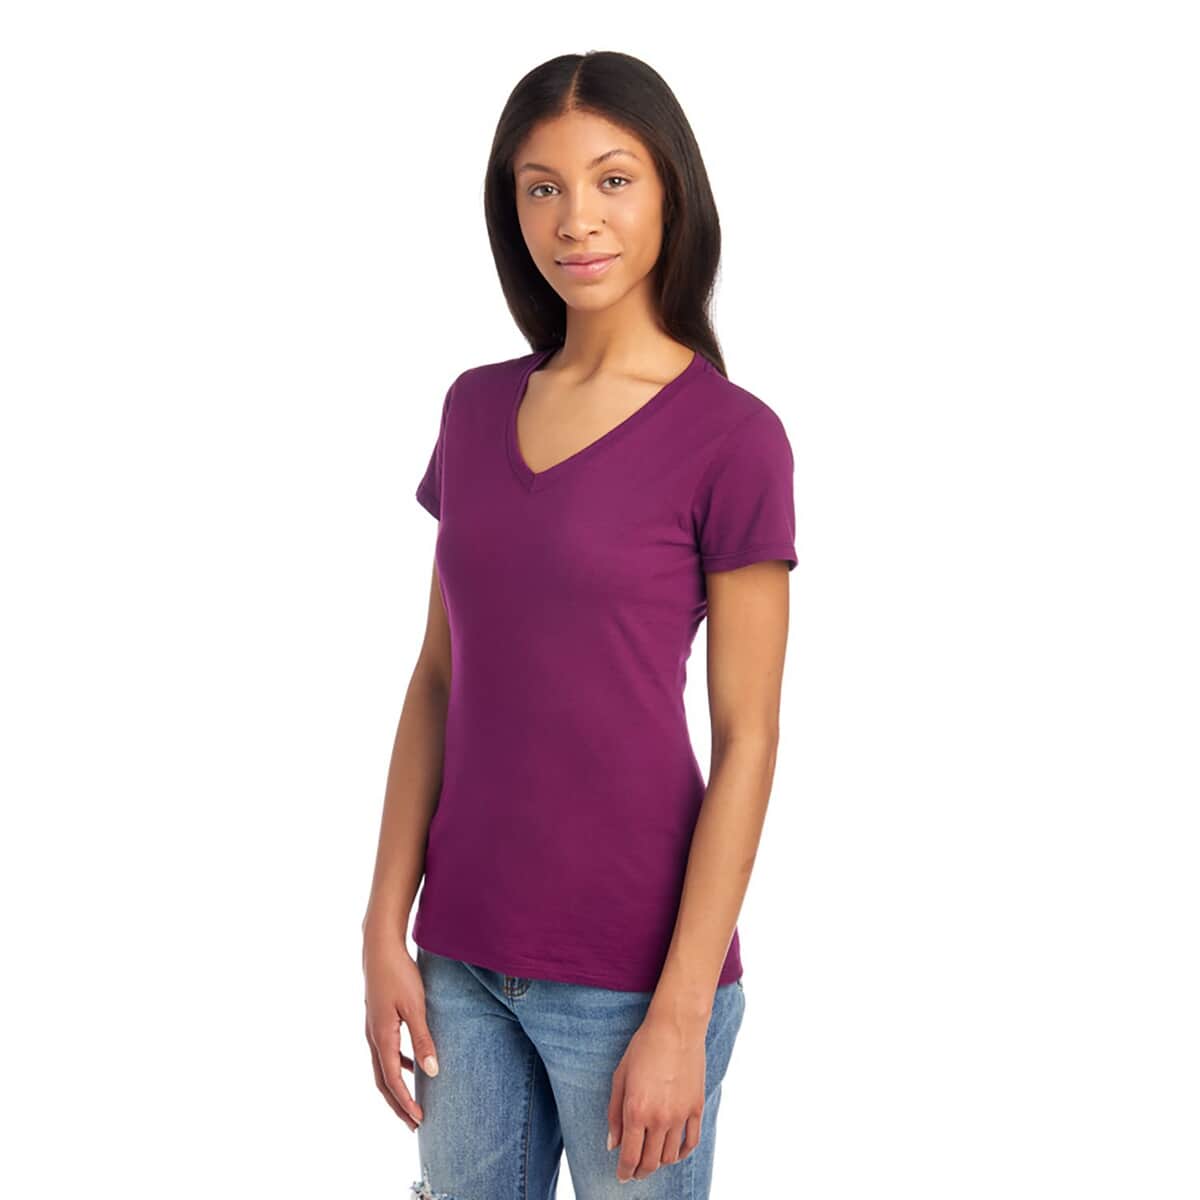 2 Pack- FRUIT OF THE LOOM 100% Cotton V-Neck T-shirts - Navy and Plum-L (Shipped in 8-10 days) image number 4